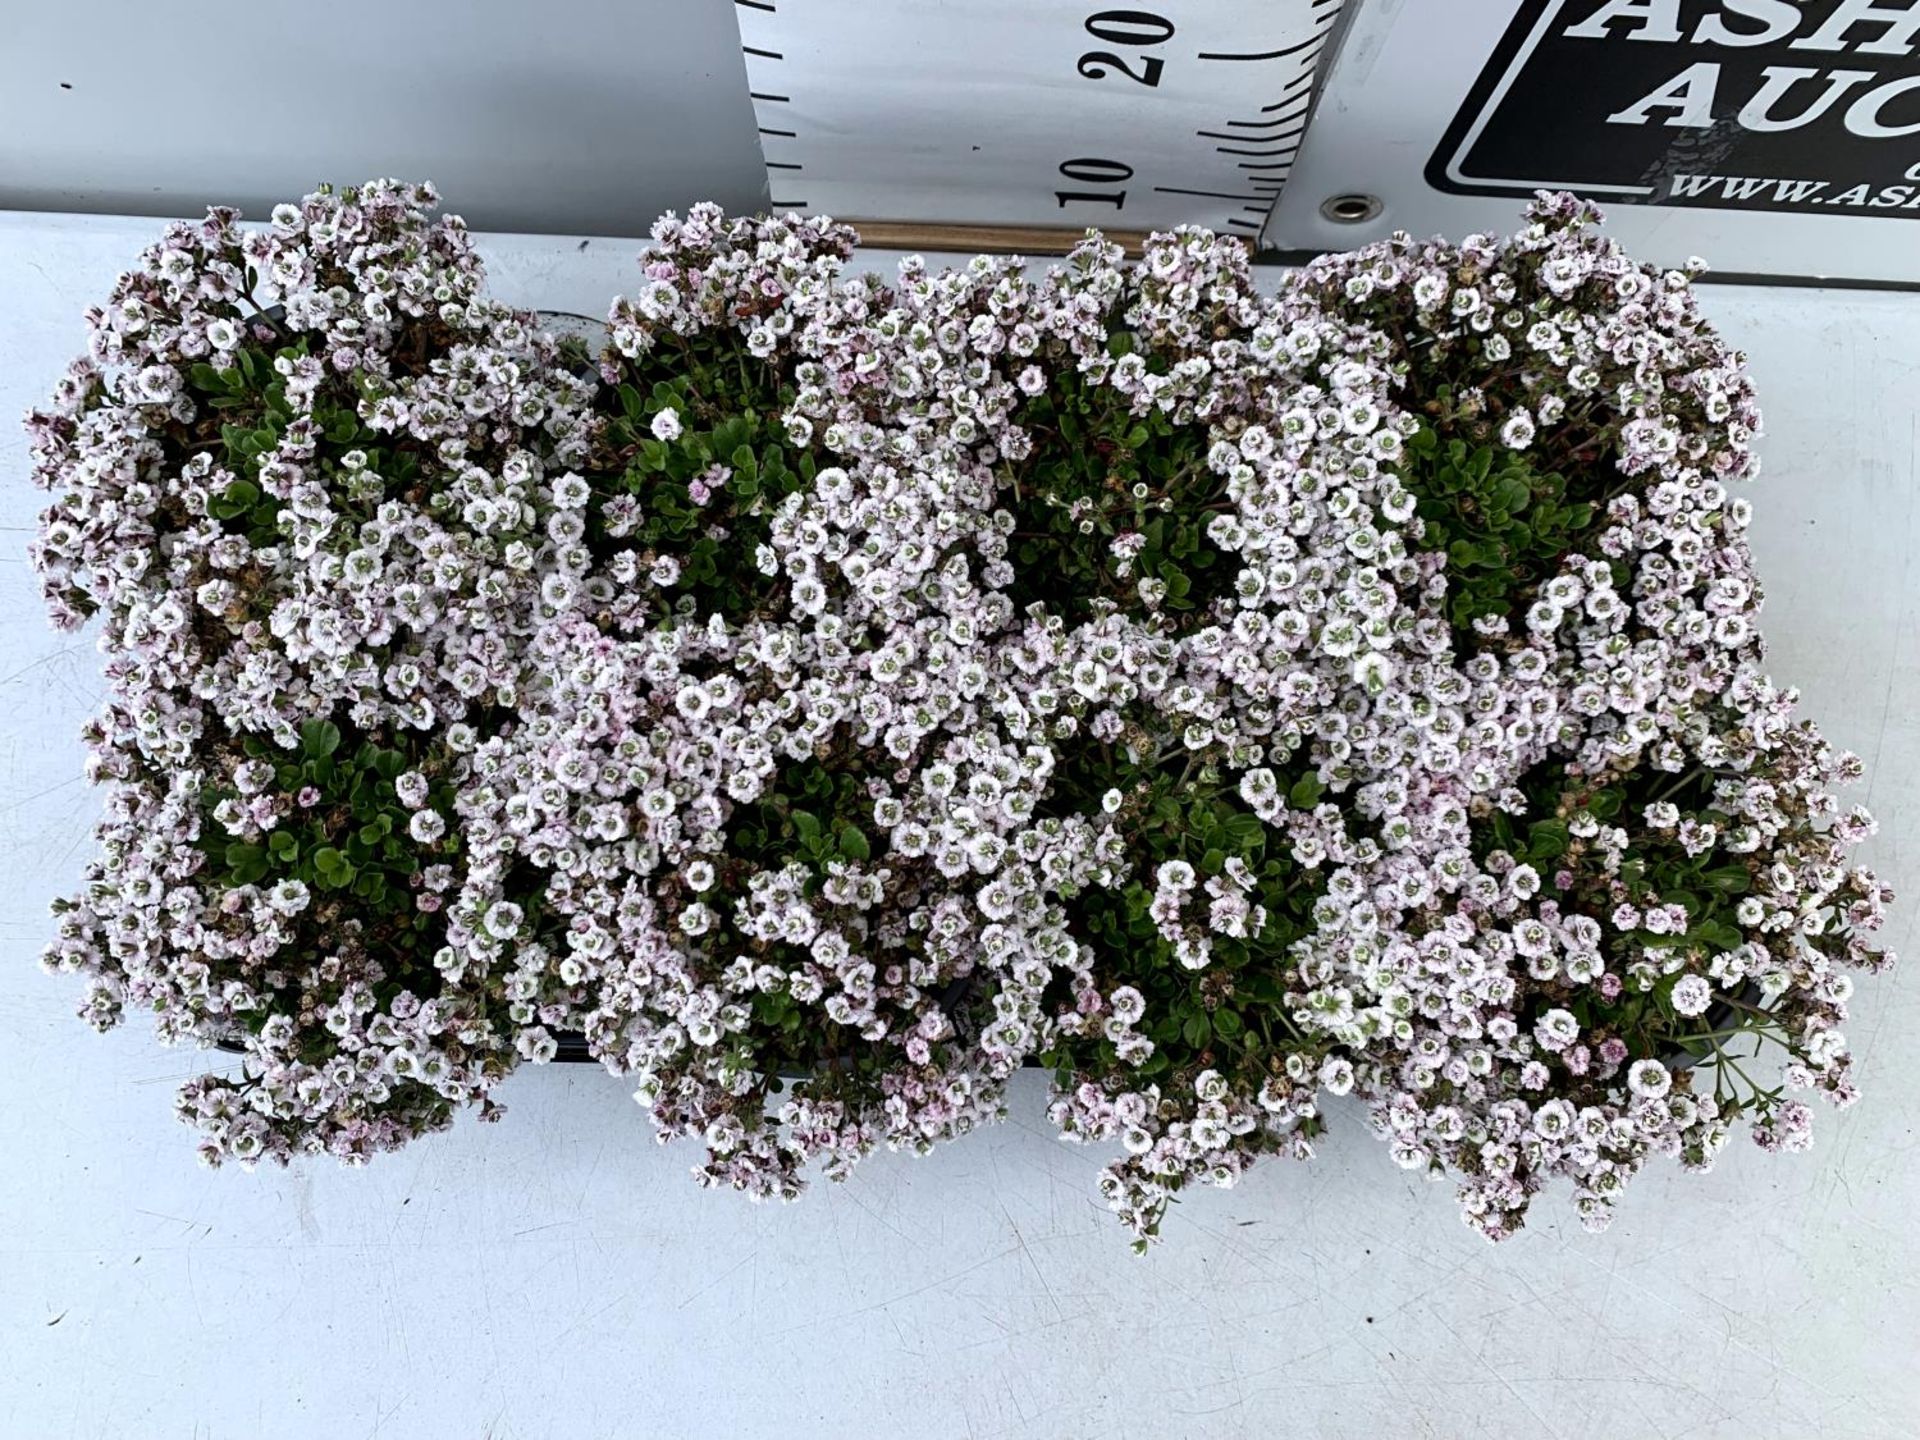 EIGHT GYPSOPHILA CERASTIOIDES PLENA WHITE IN 1 LTR POTS APPROX 20CM IN HEIGHT PLUS VAT TO BE SOLD - Image 3 of 8